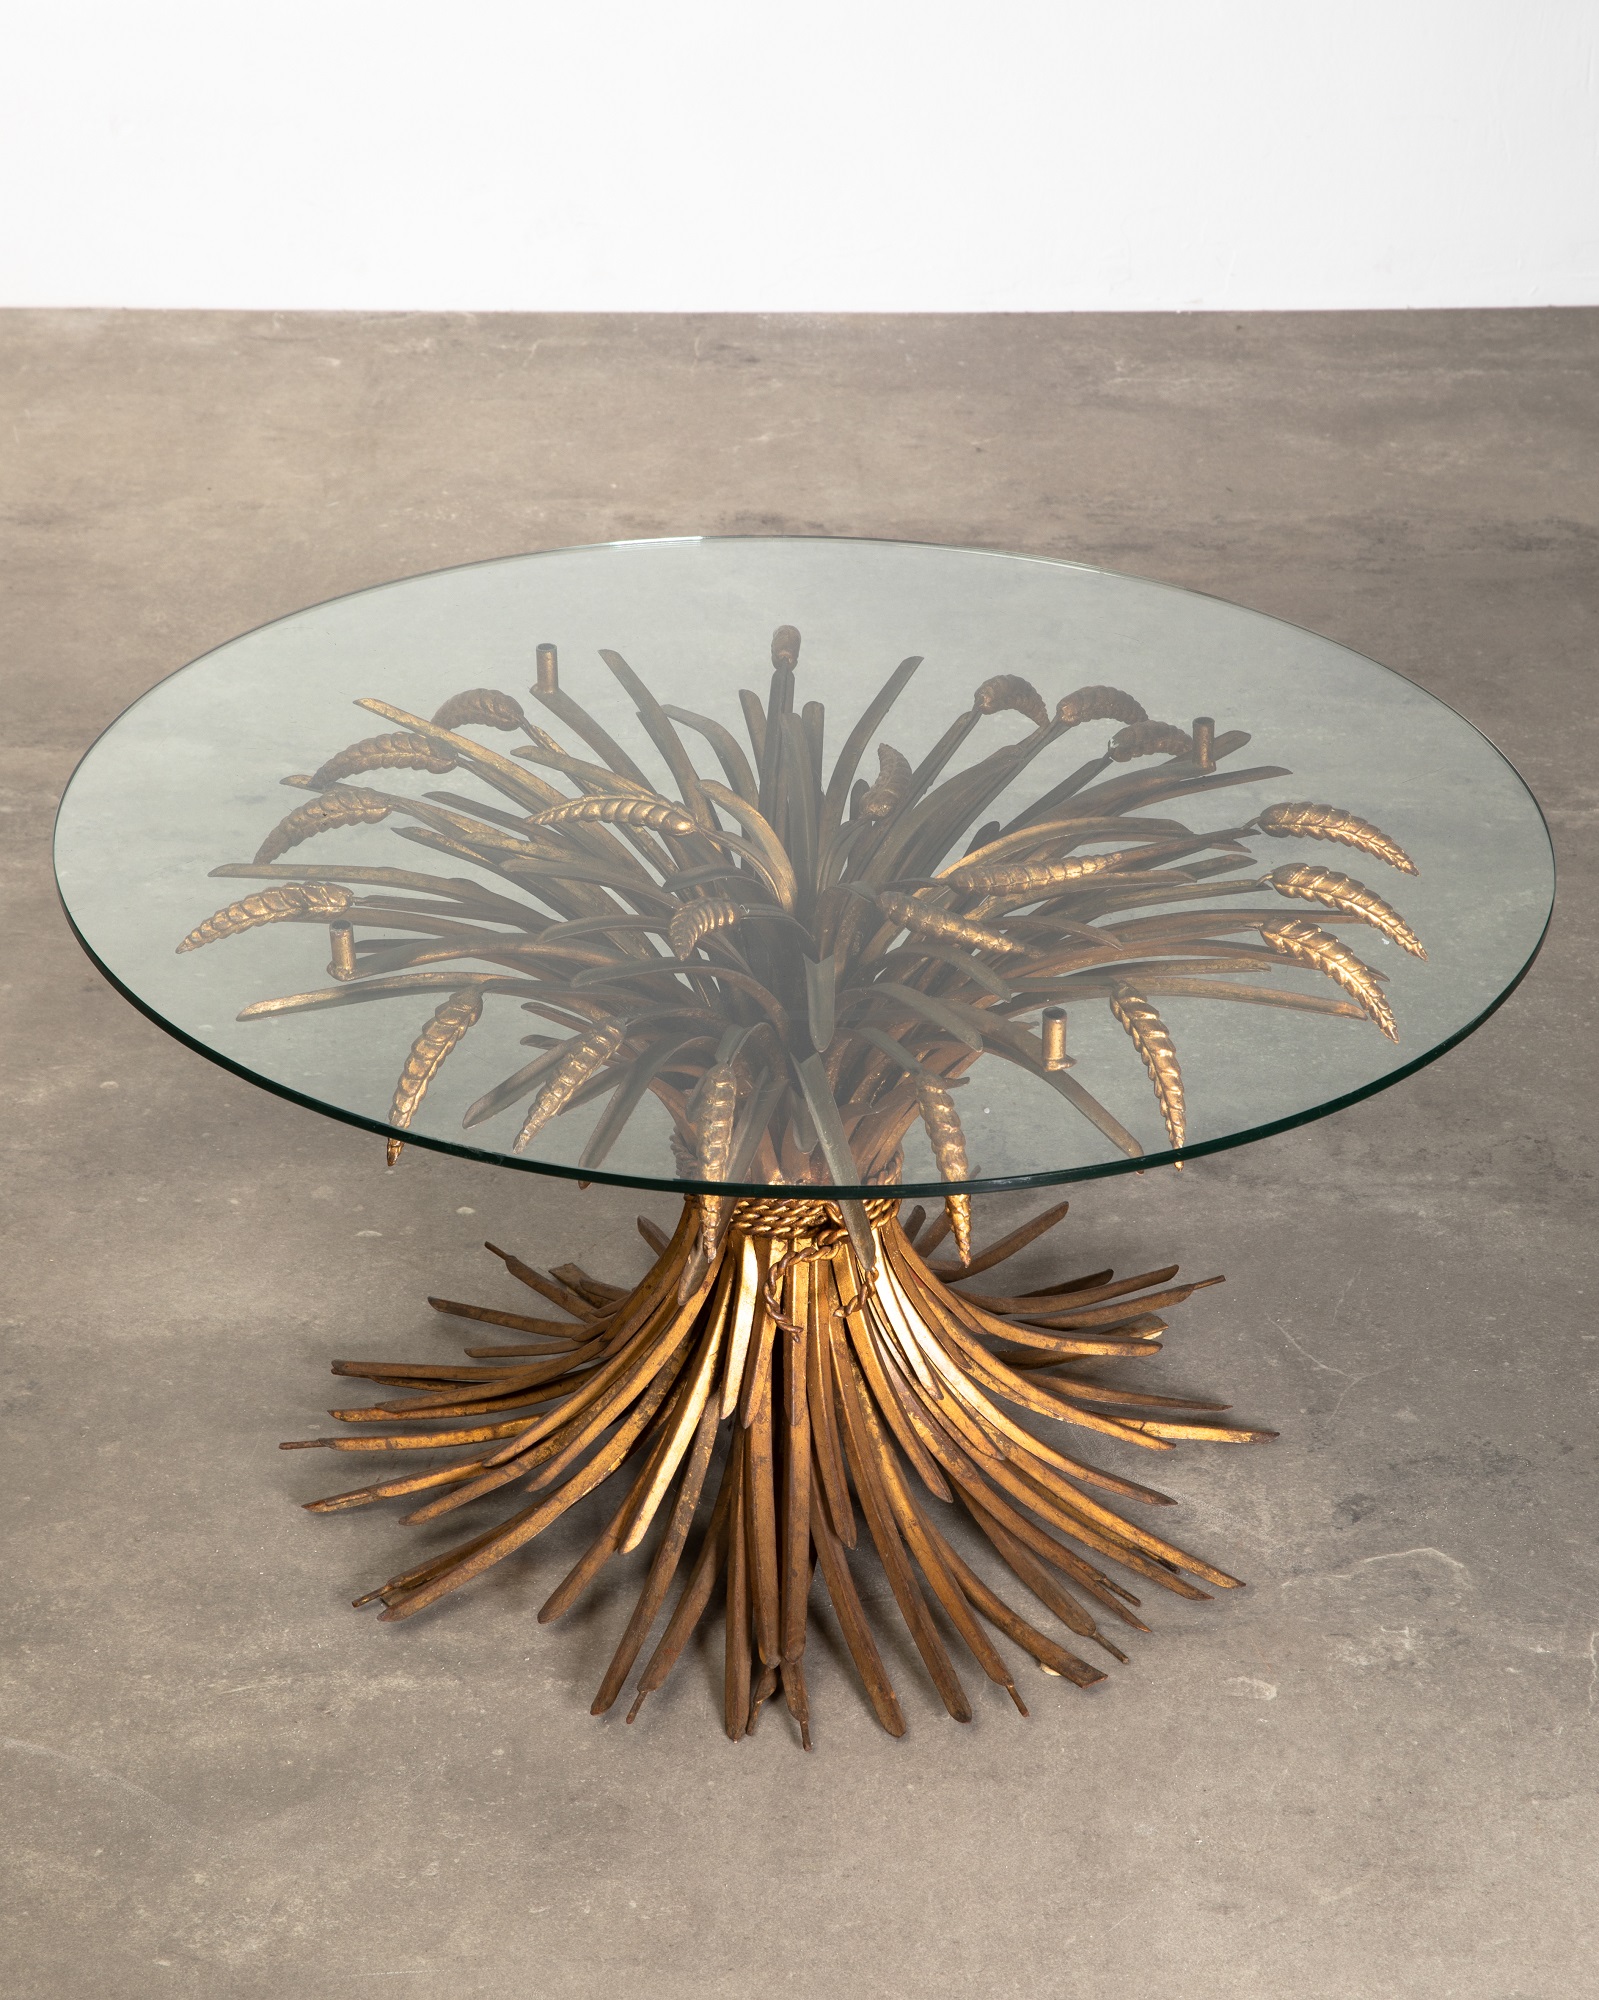 Coco Chanel Sheaf of Wheat Table - Image 3 of 3